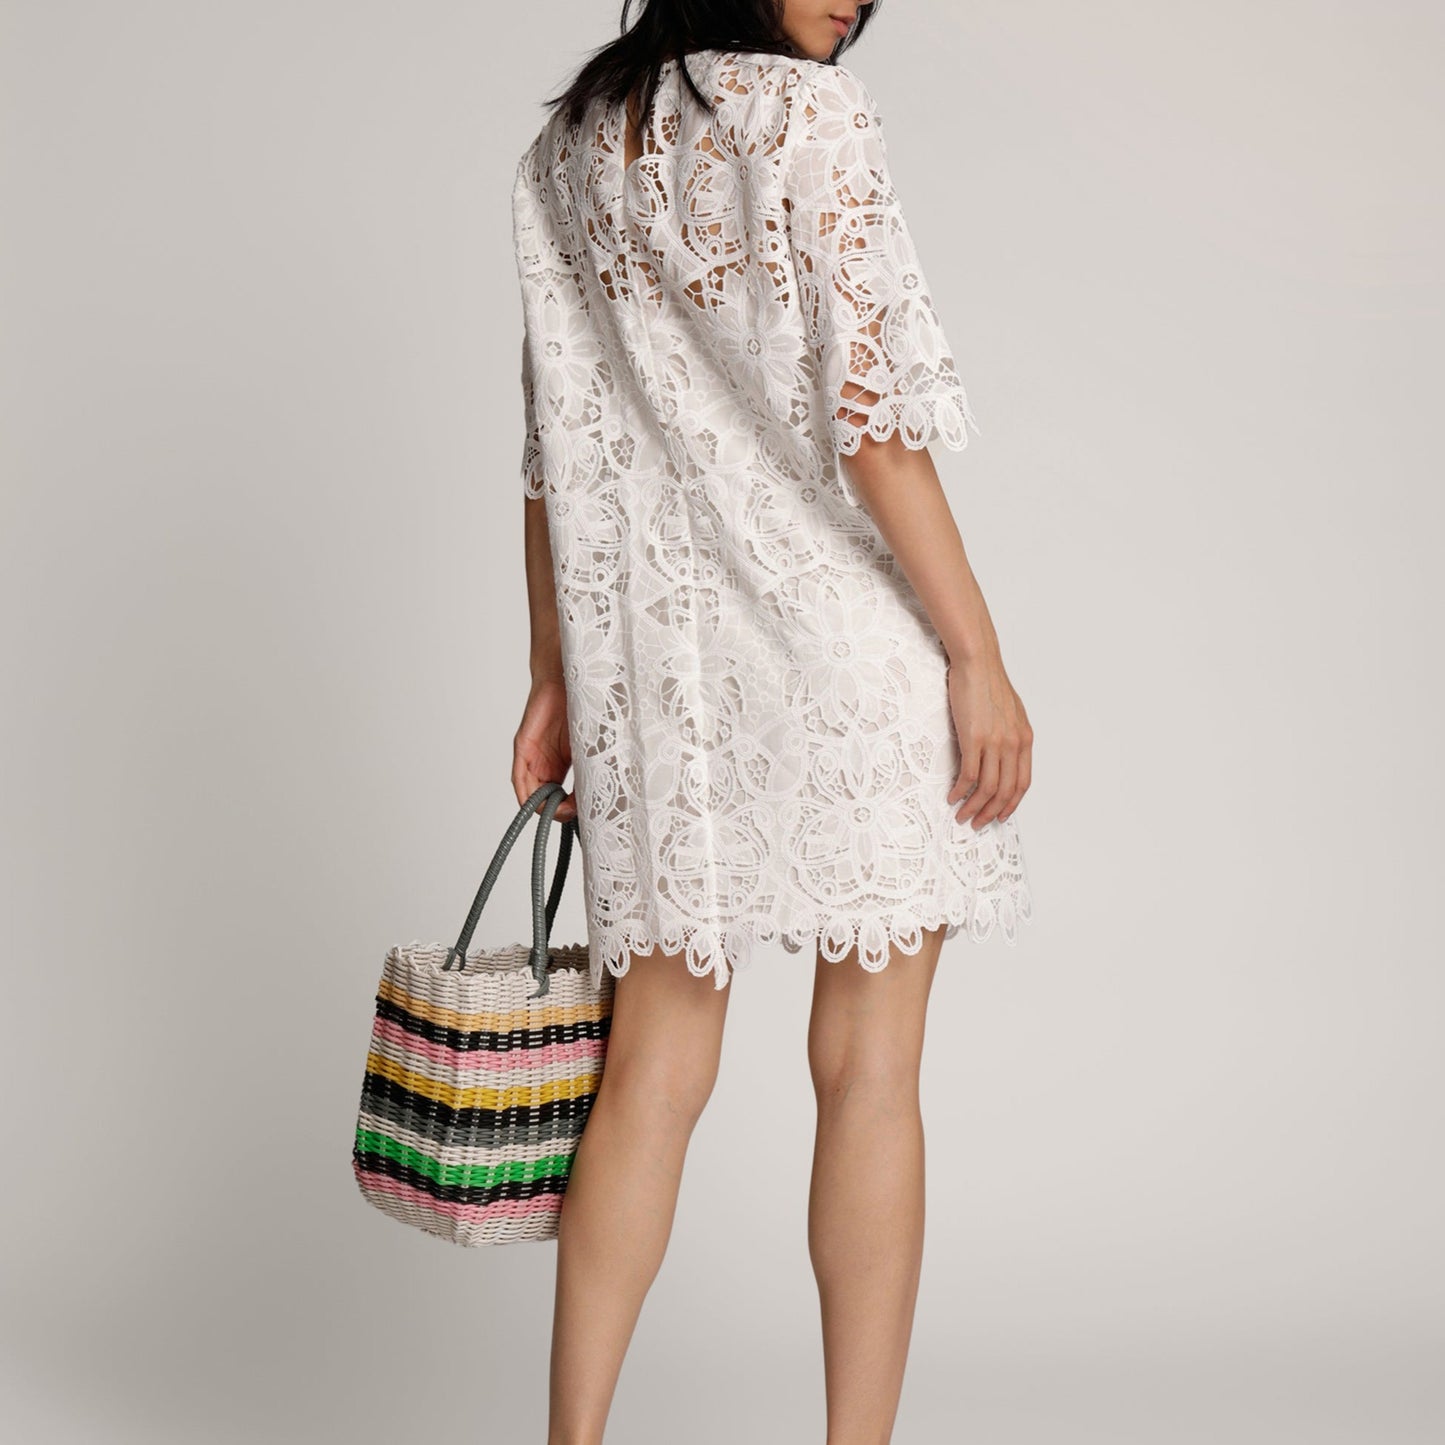 Lisol Lace Dress in White